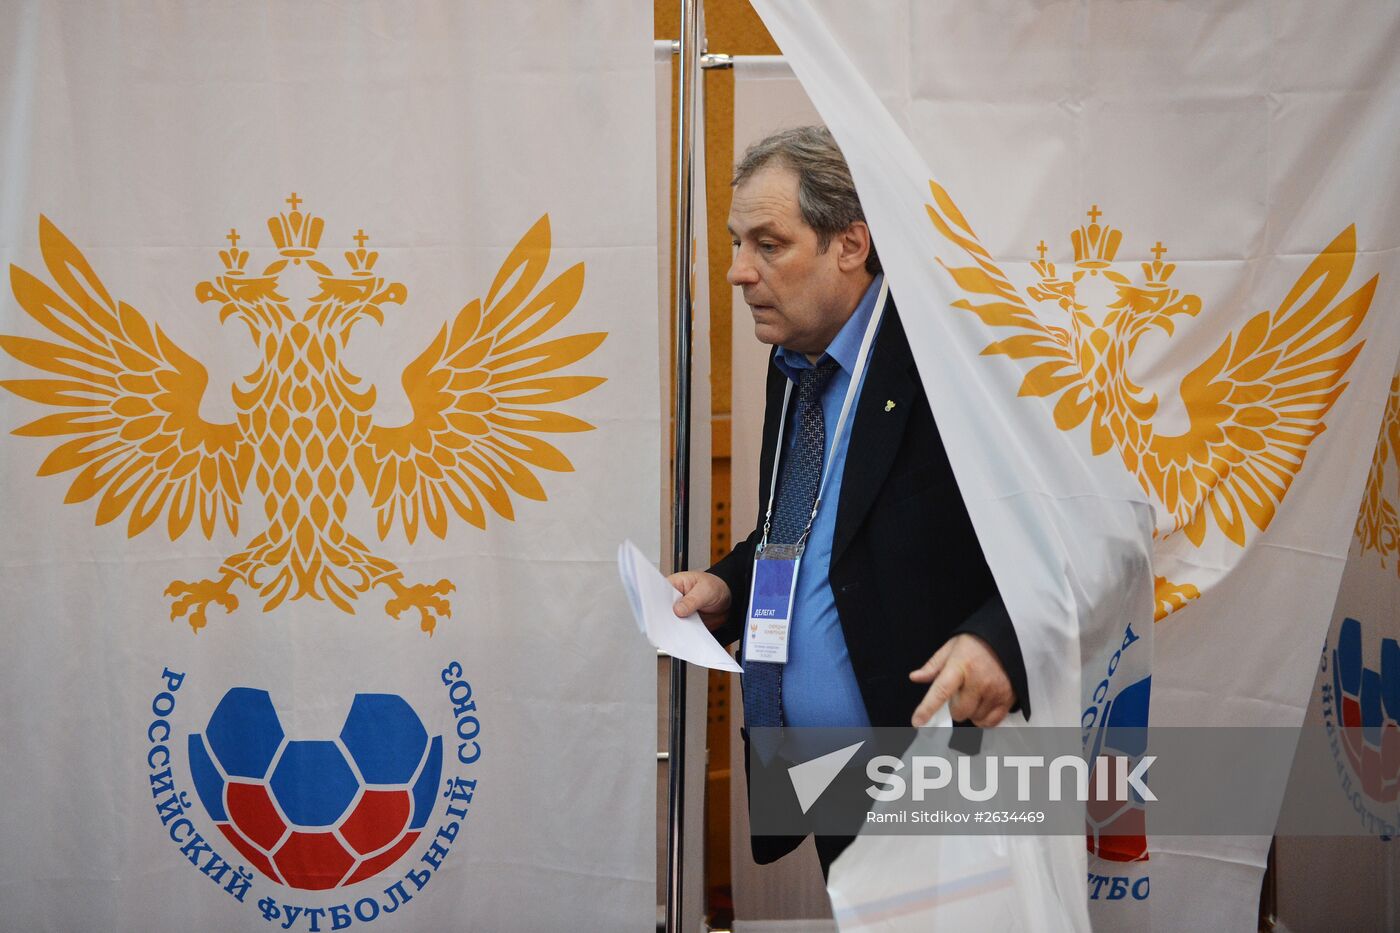 Conference of Russian Football Union